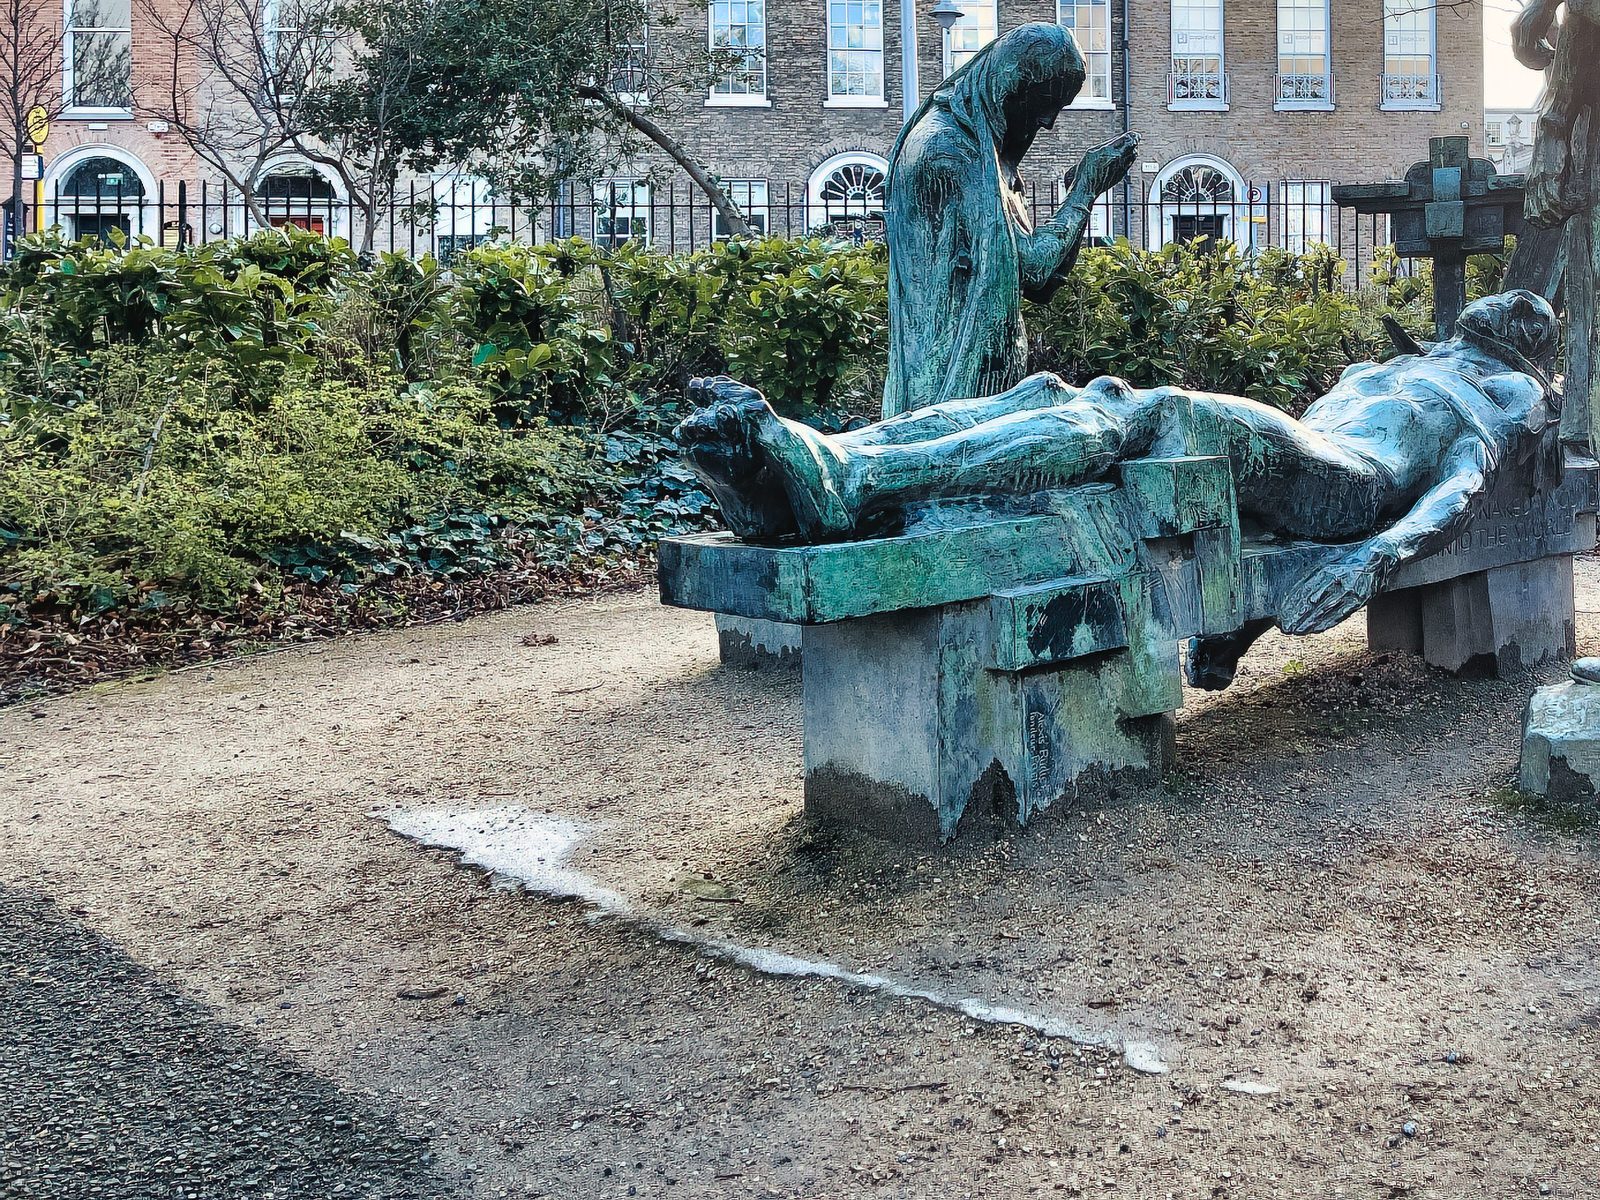 THE VICTIMS BY ANDREW O’CONNOR IN MERRION SQUARE PARK 006